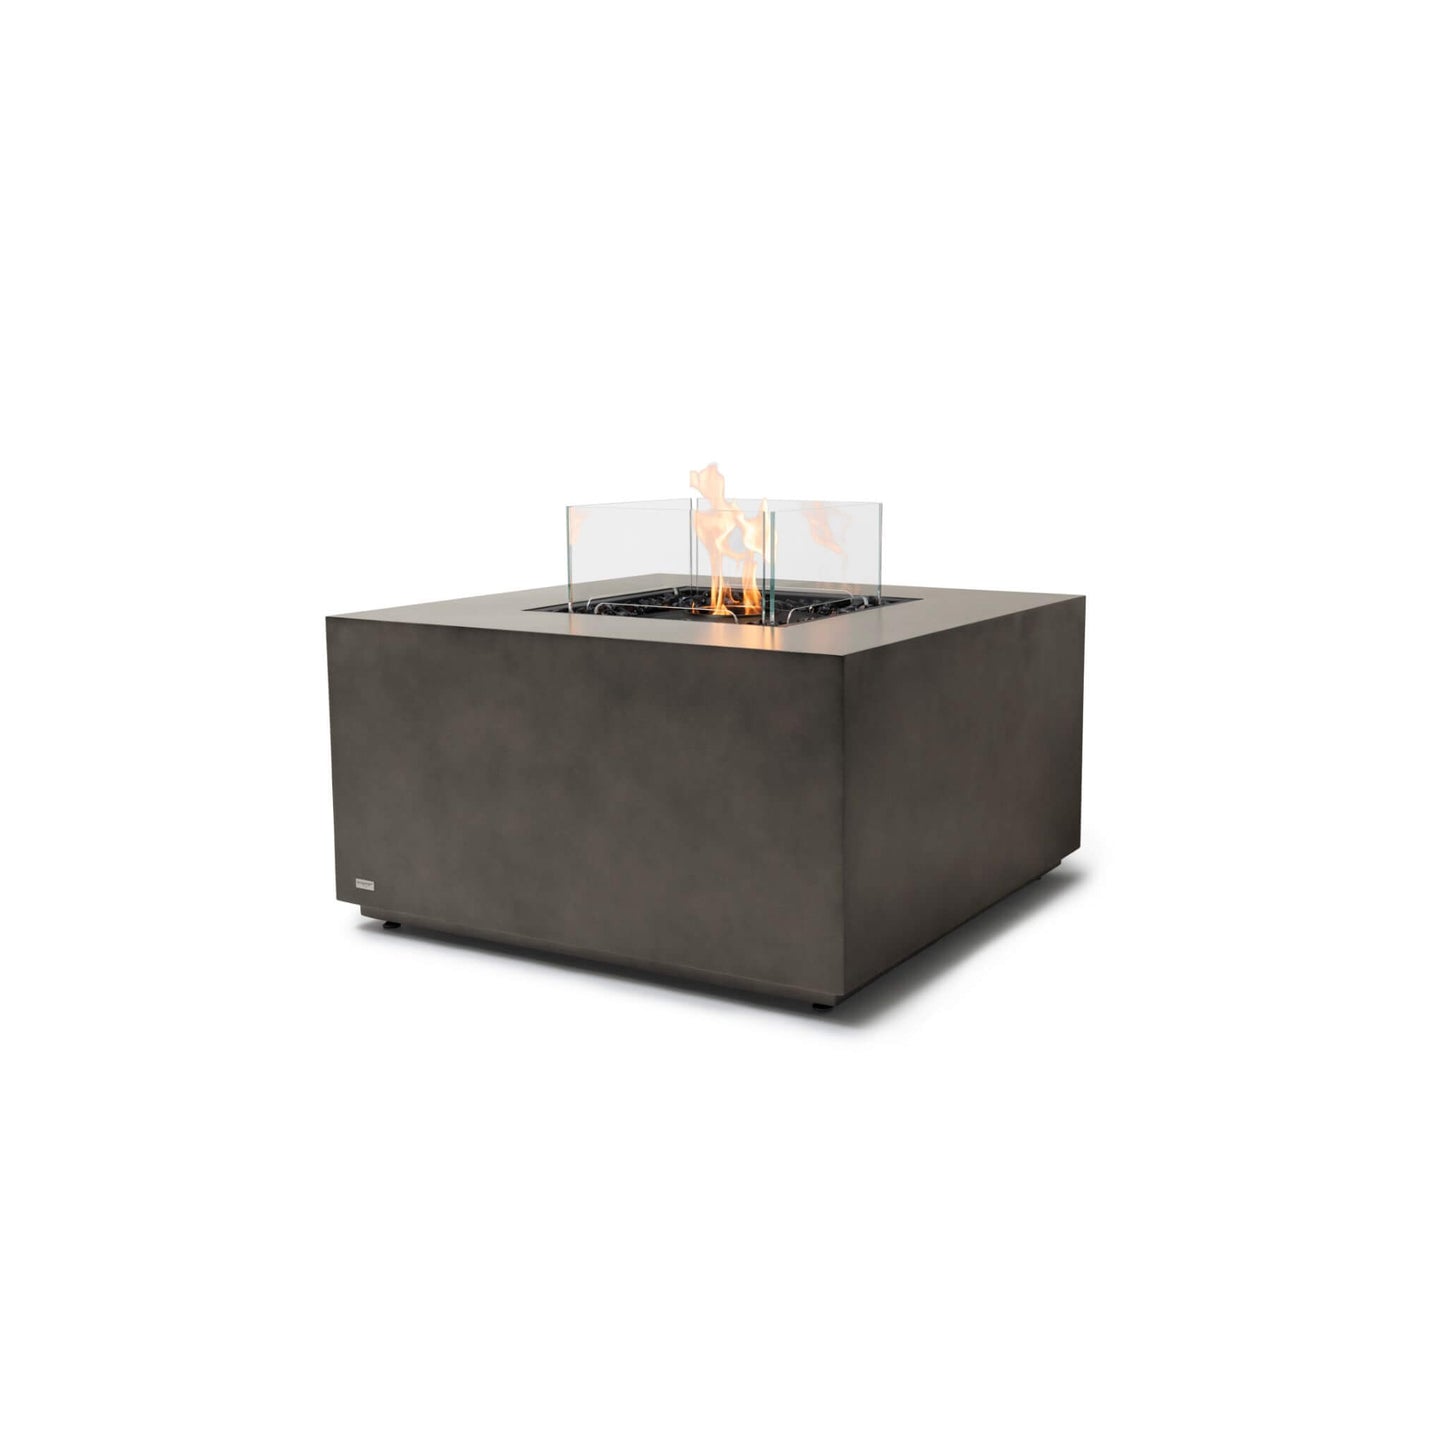 Ecosmart Fire Chaser 38 Concrete Bioethanol Fire Pit Table